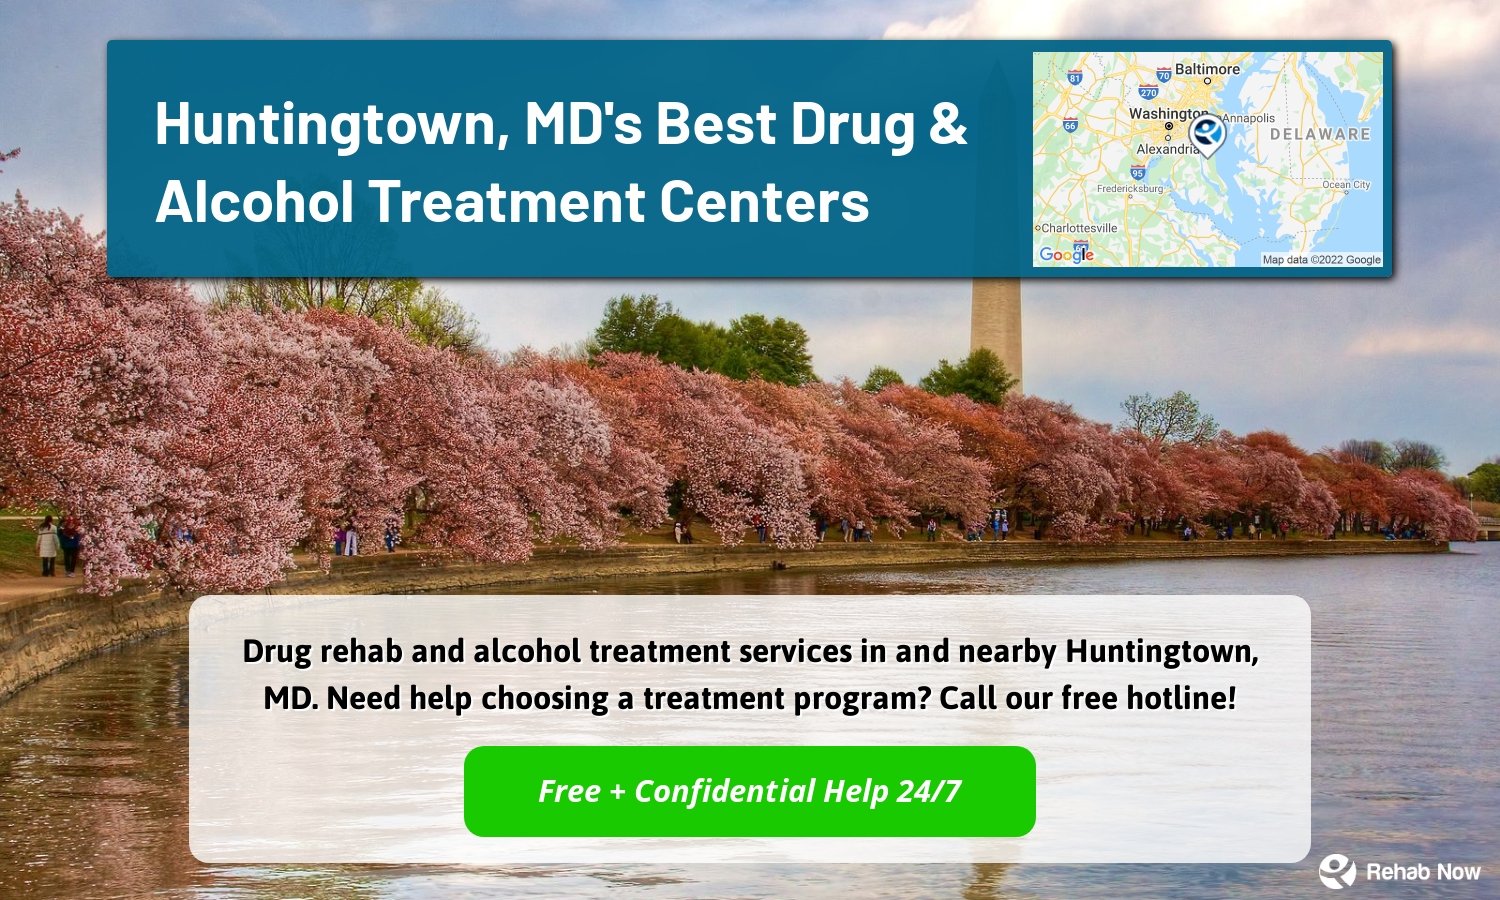 Drug rehab and alcohol treatment services in and nearby Huntingtown, MD. Need help choosing a treatment program? Call our free hotline!